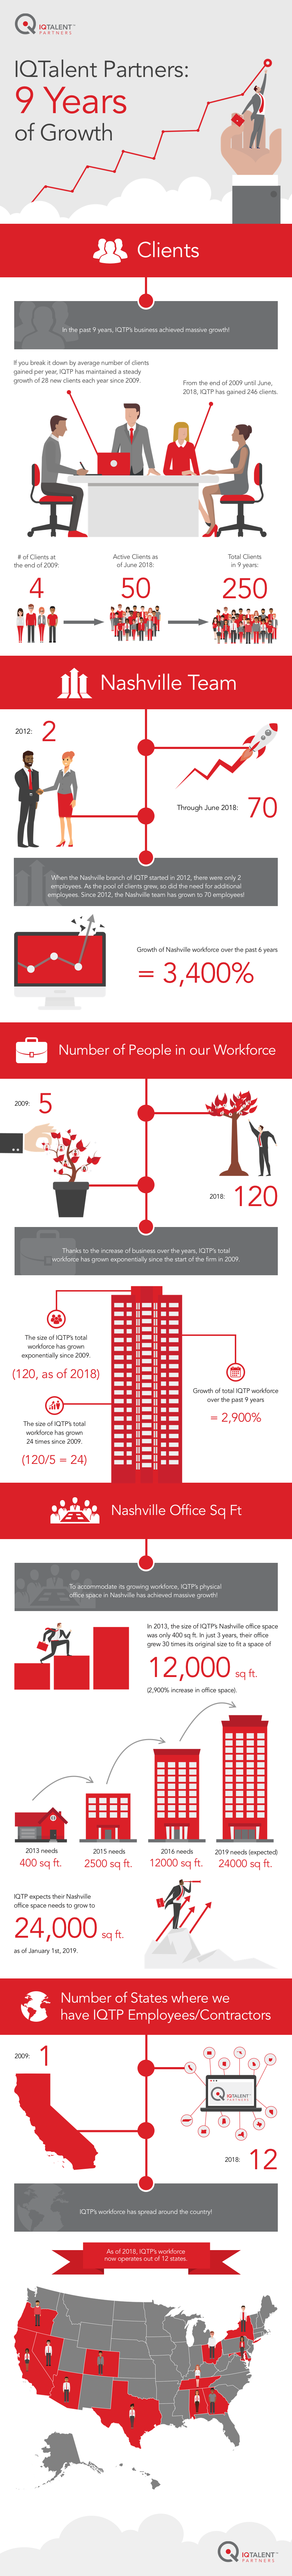 IQTalent Partners growth infographic